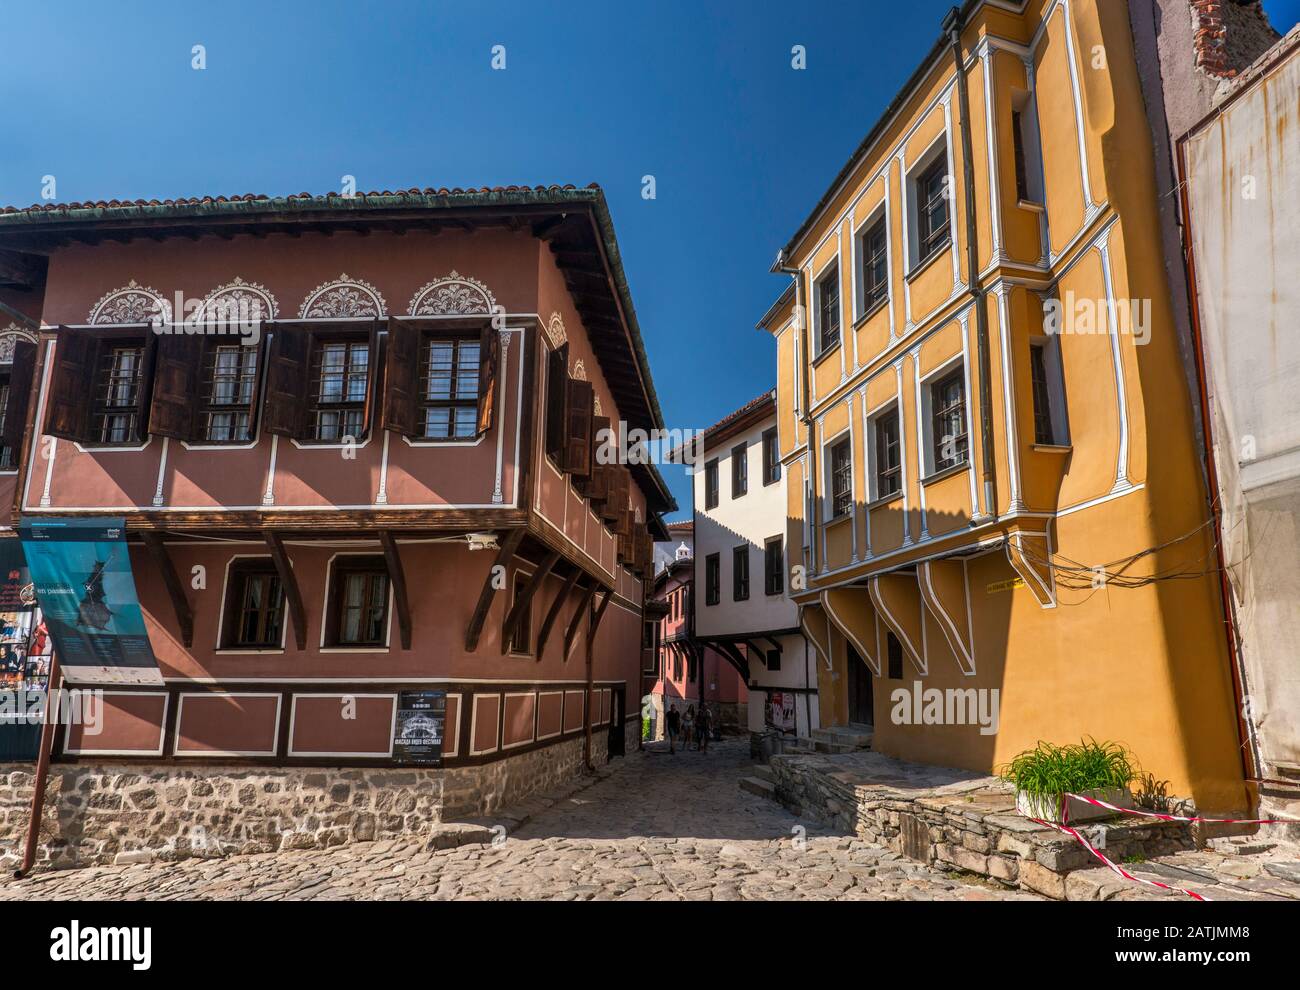 Historic buildings in Bulgarian National Revival style, Balabanov House Museum on left, in Plovdiv, Bulgaria Stock Photo